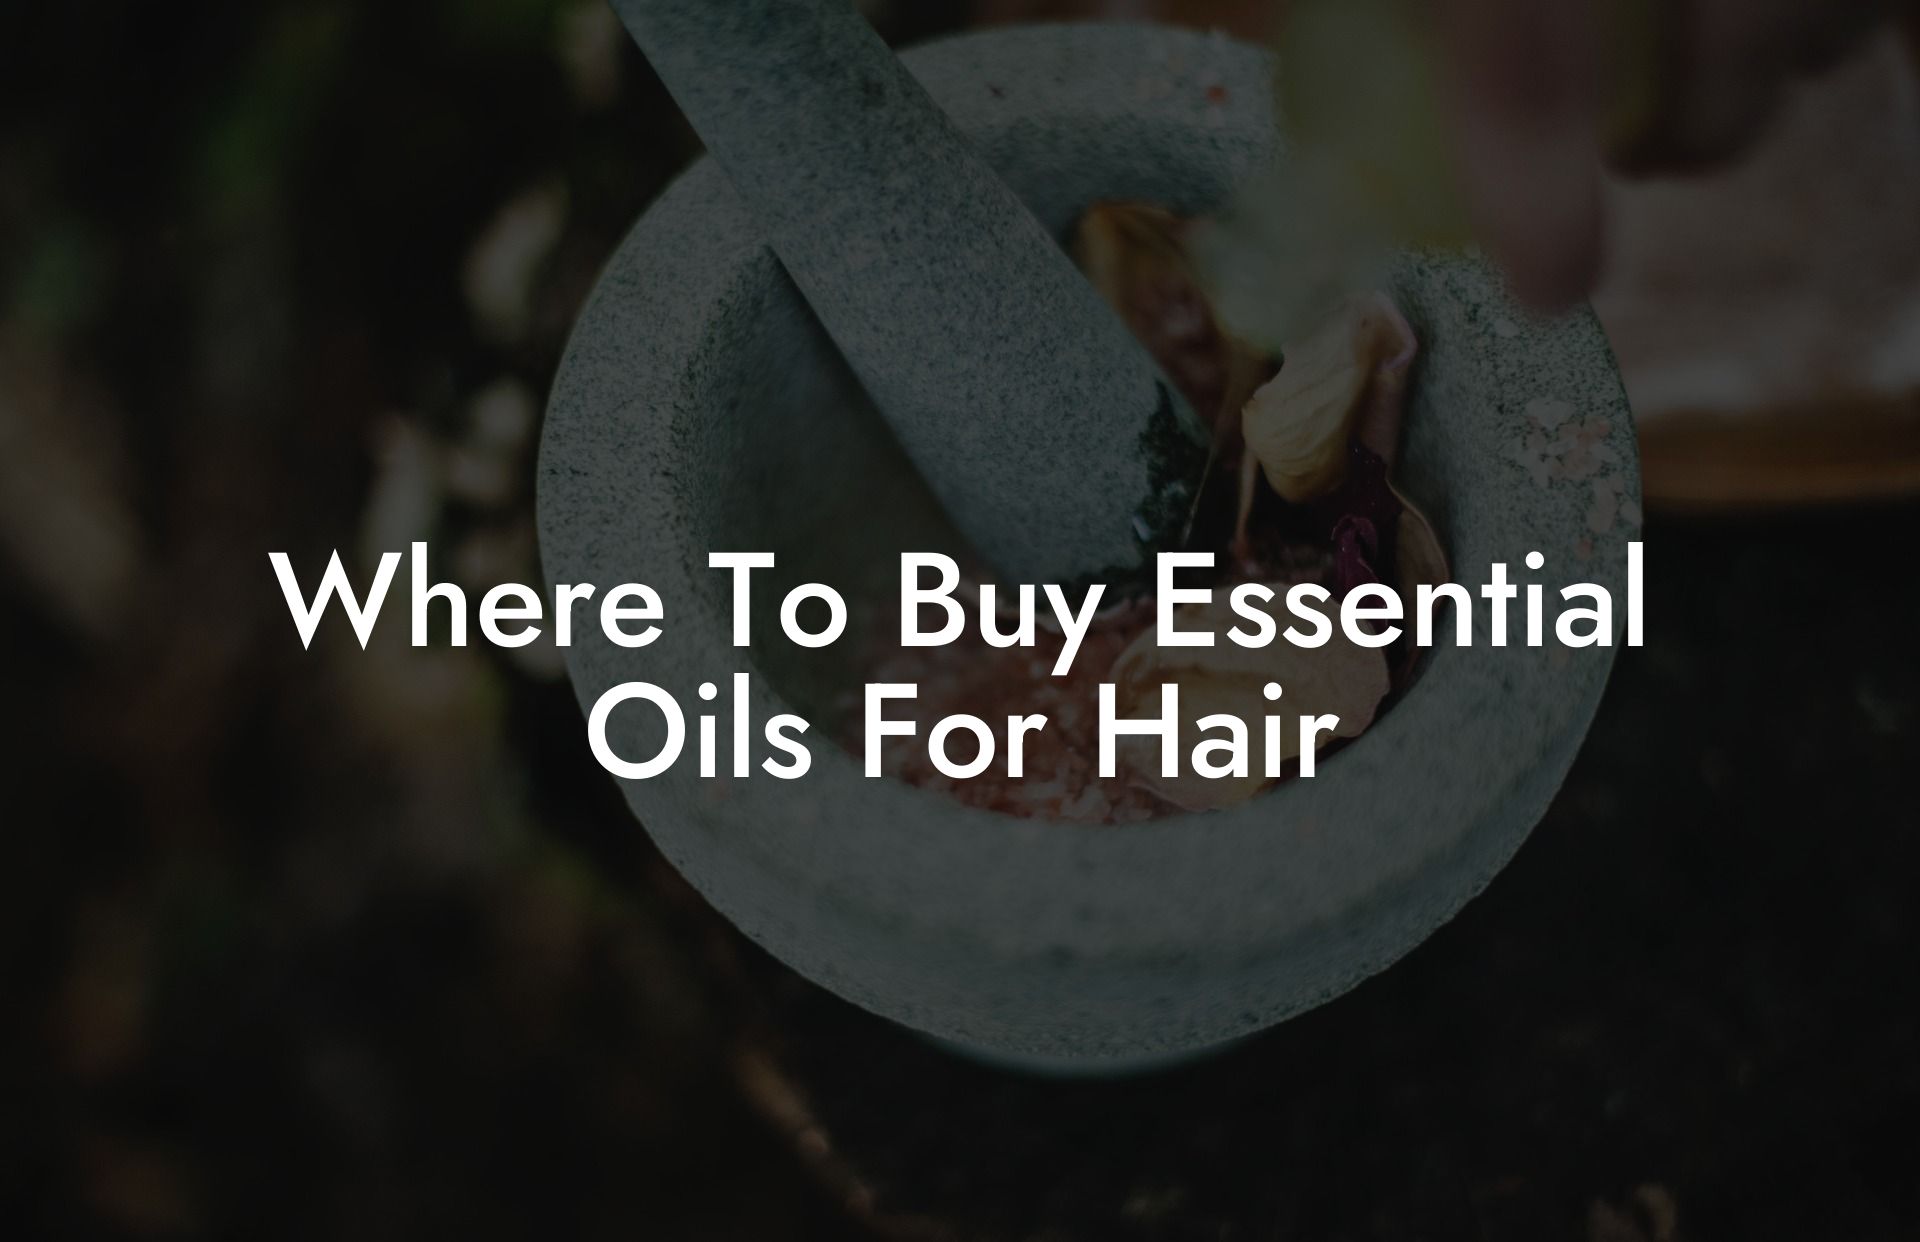 Where To Buy Essential Oils For Hair